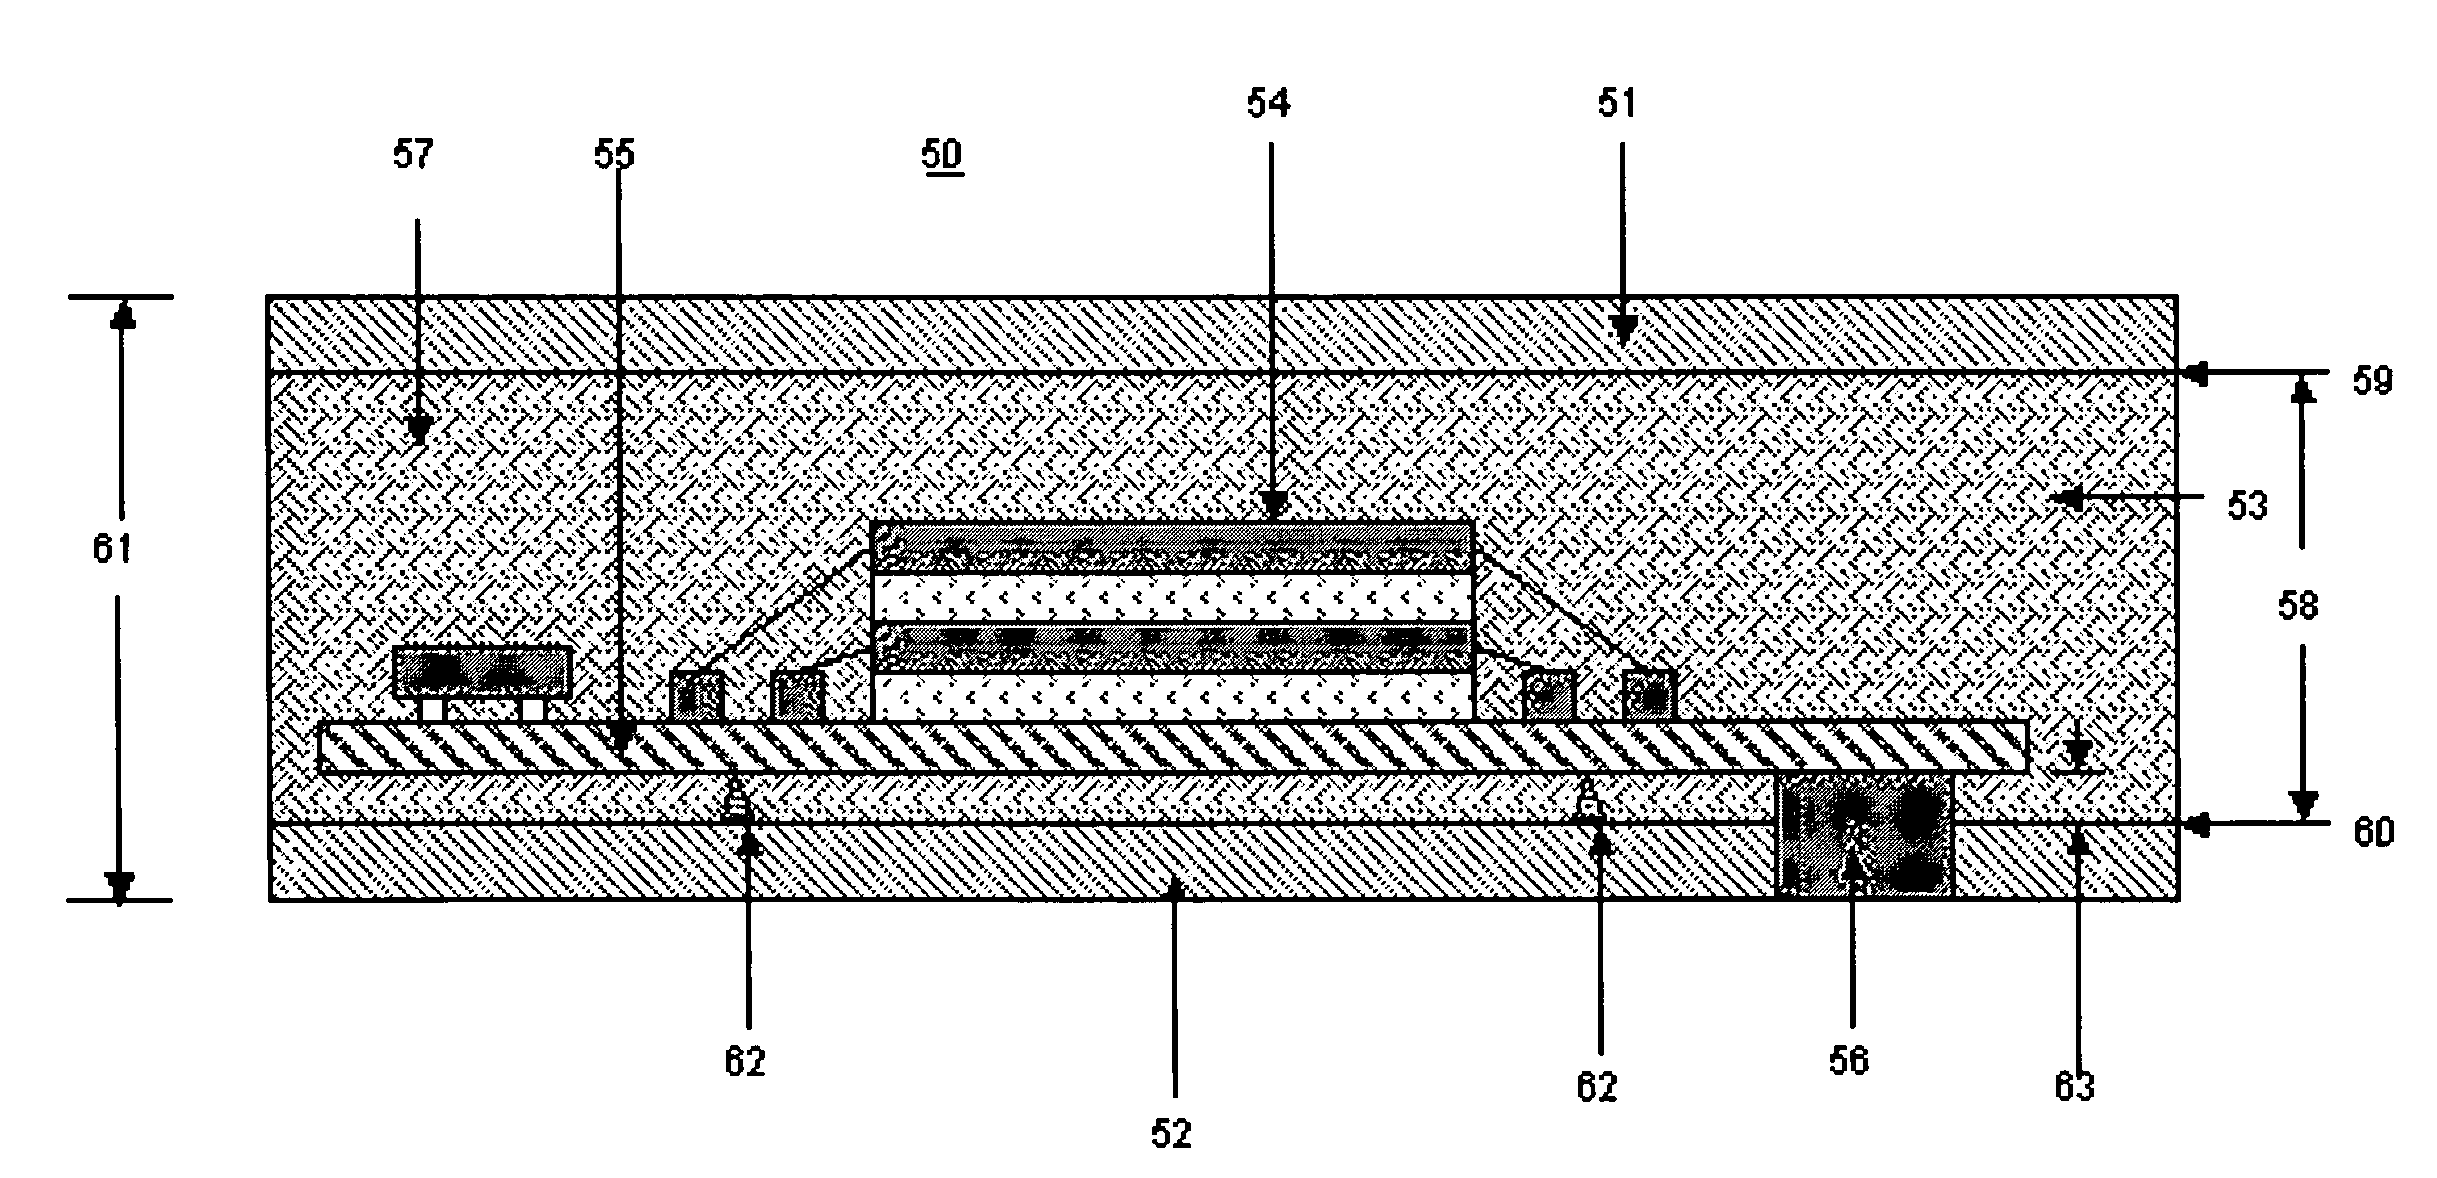 Method for making memory cards and similar devices using isotropic thermoset materials with high quality exterior surfaces